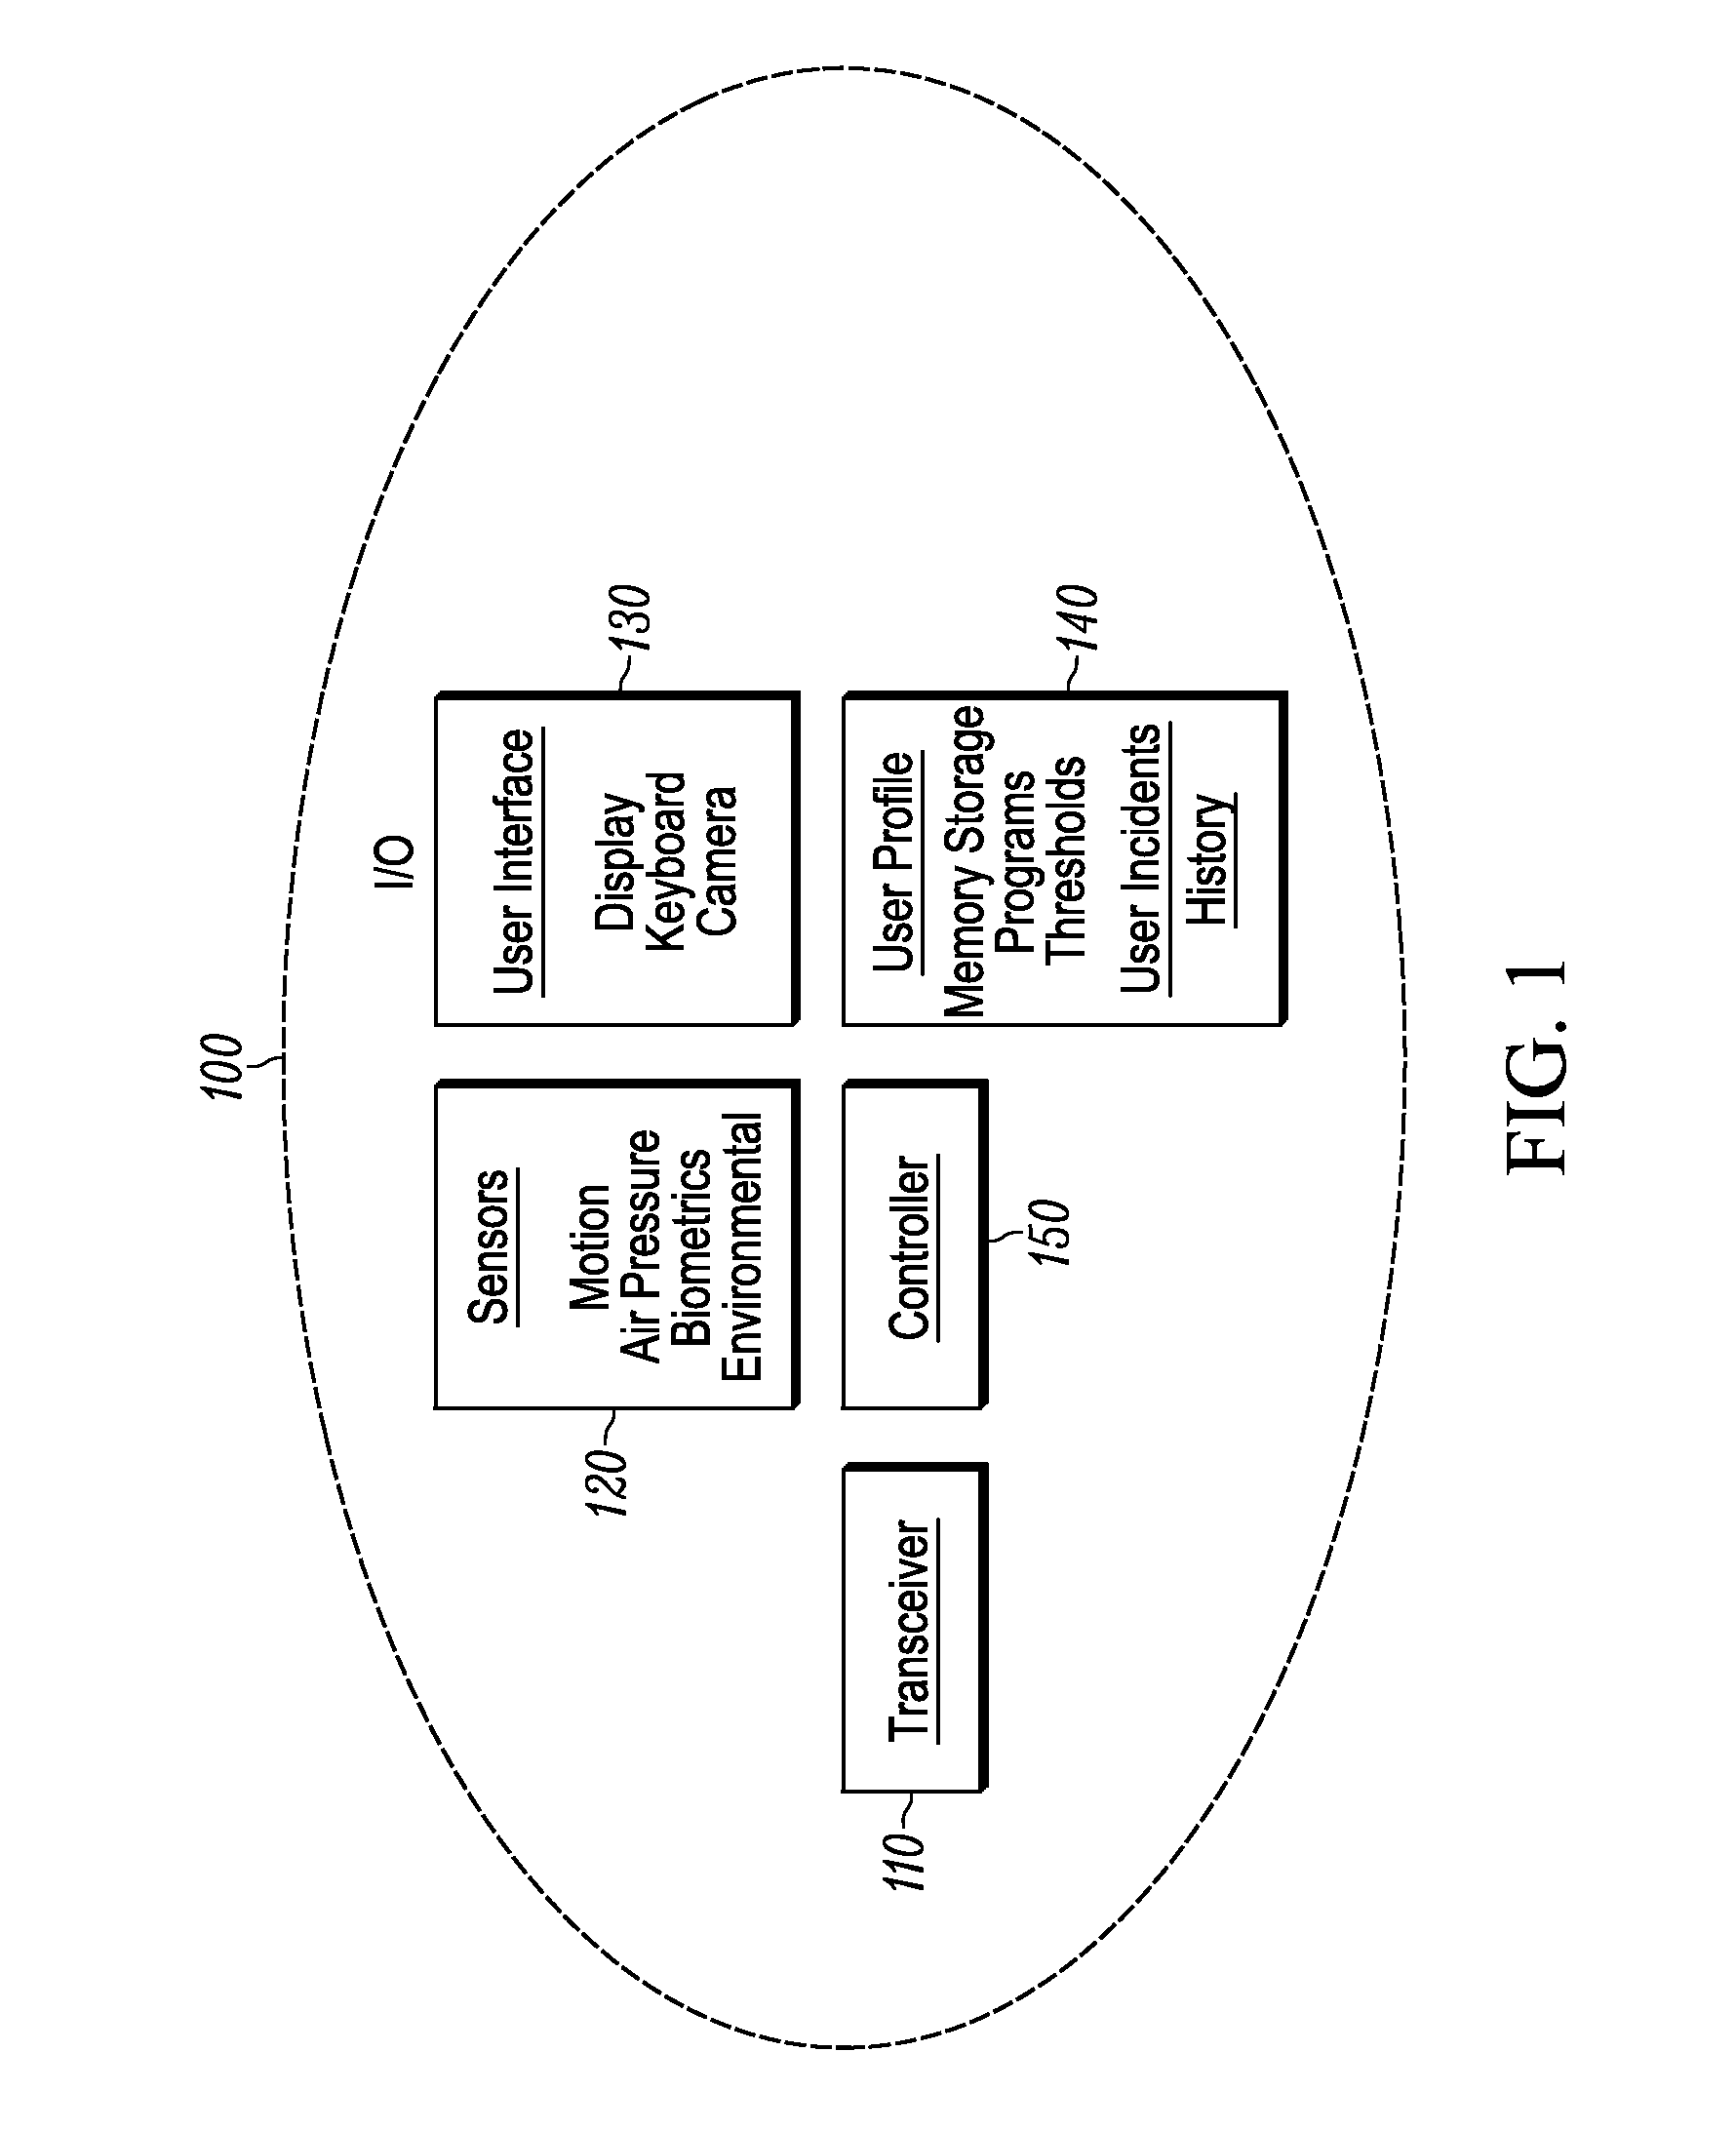 Method for adapting a mobile communication device's function to monitored activity and a user's profile